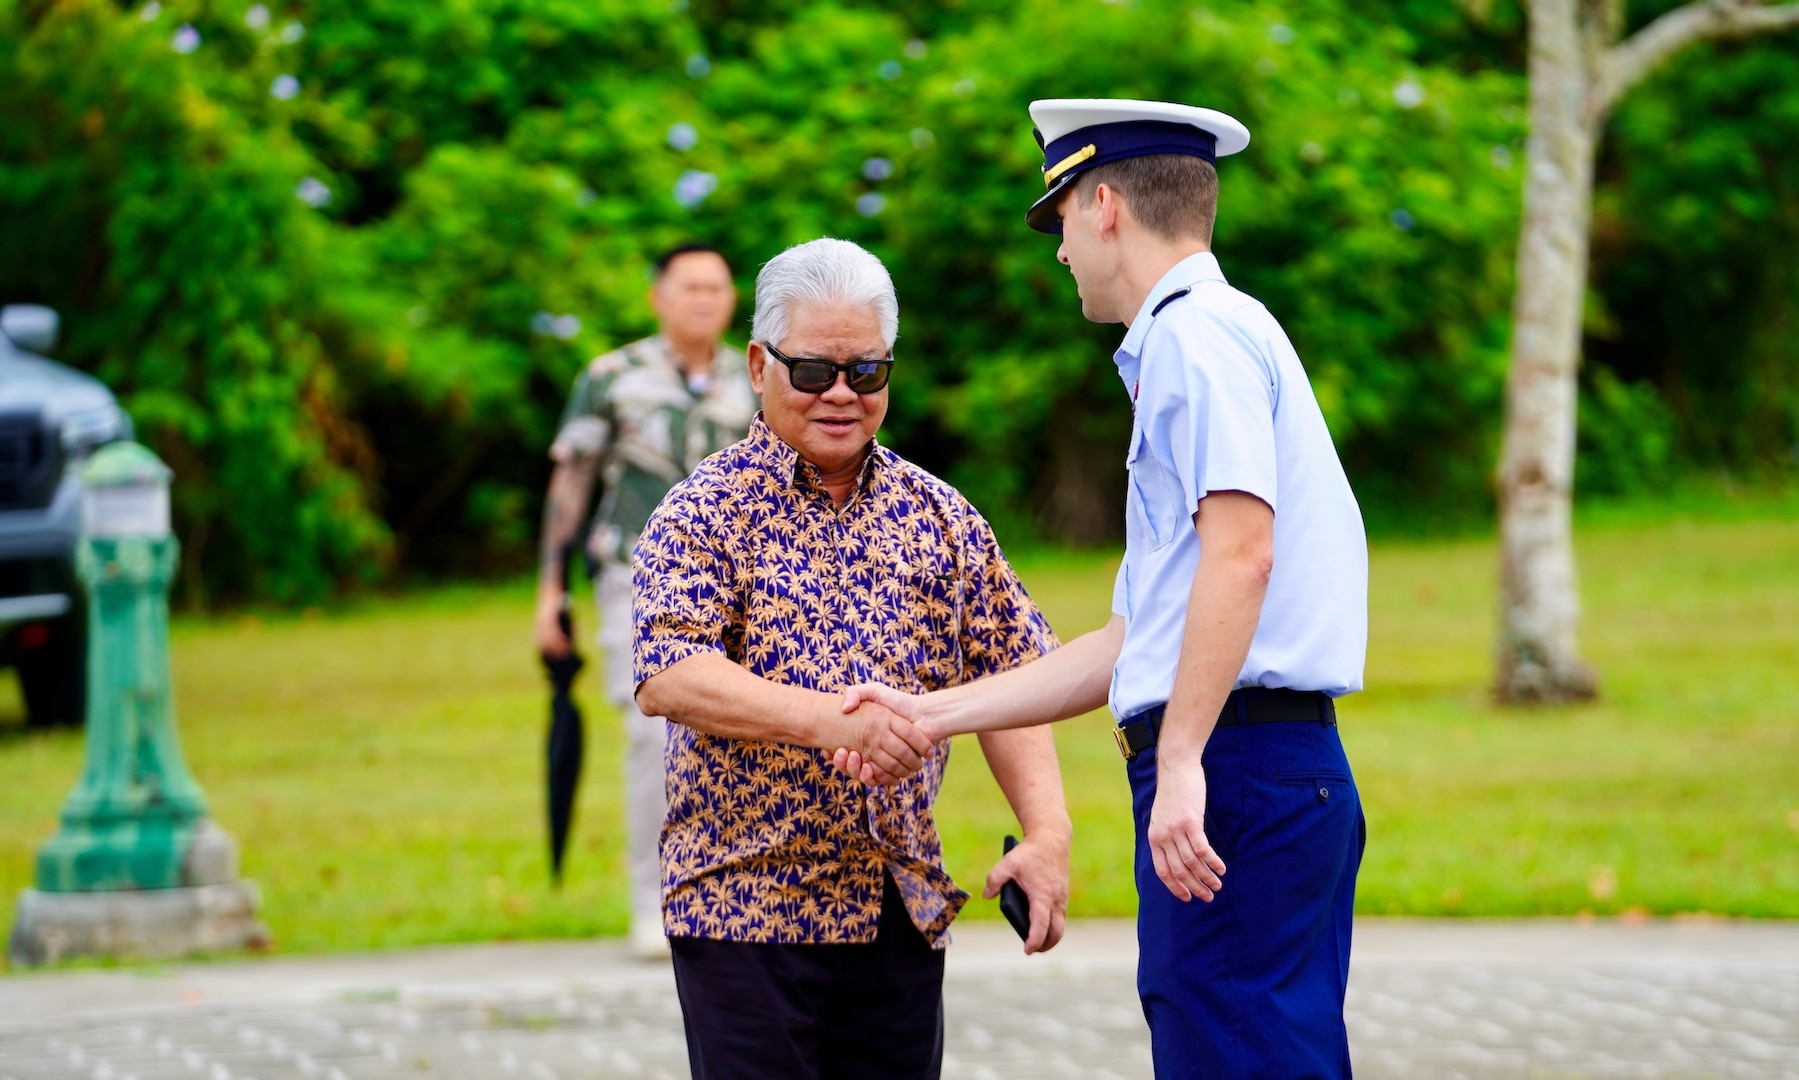 Lt. Justin Miller, commanding officer of Marine Safety Unit Saipan, greets Gov. Arnold Palacios at a ceremony to formally establish MSU Saipan in Garapan at the American Memorial Park on April 5, 2024. This significant achievement marks a milestone in leadership evolution and responsibility expansion within the U.S. Coast Guard, reflecting steadfast commitment to serving the people of Saipan and the Commonwealth of the Northern Marianas Islands (CNMI) with unparalleled dedication and excellence. The change is part of an initiative to provide junior officers with increased command opportunities, fostering professional growth and leadership development within the ranks. Eighteen marine safety detachments are converting to marine safety units. (U.S. Coast Guard photo by Chief Warrant Officer Sara Muir)